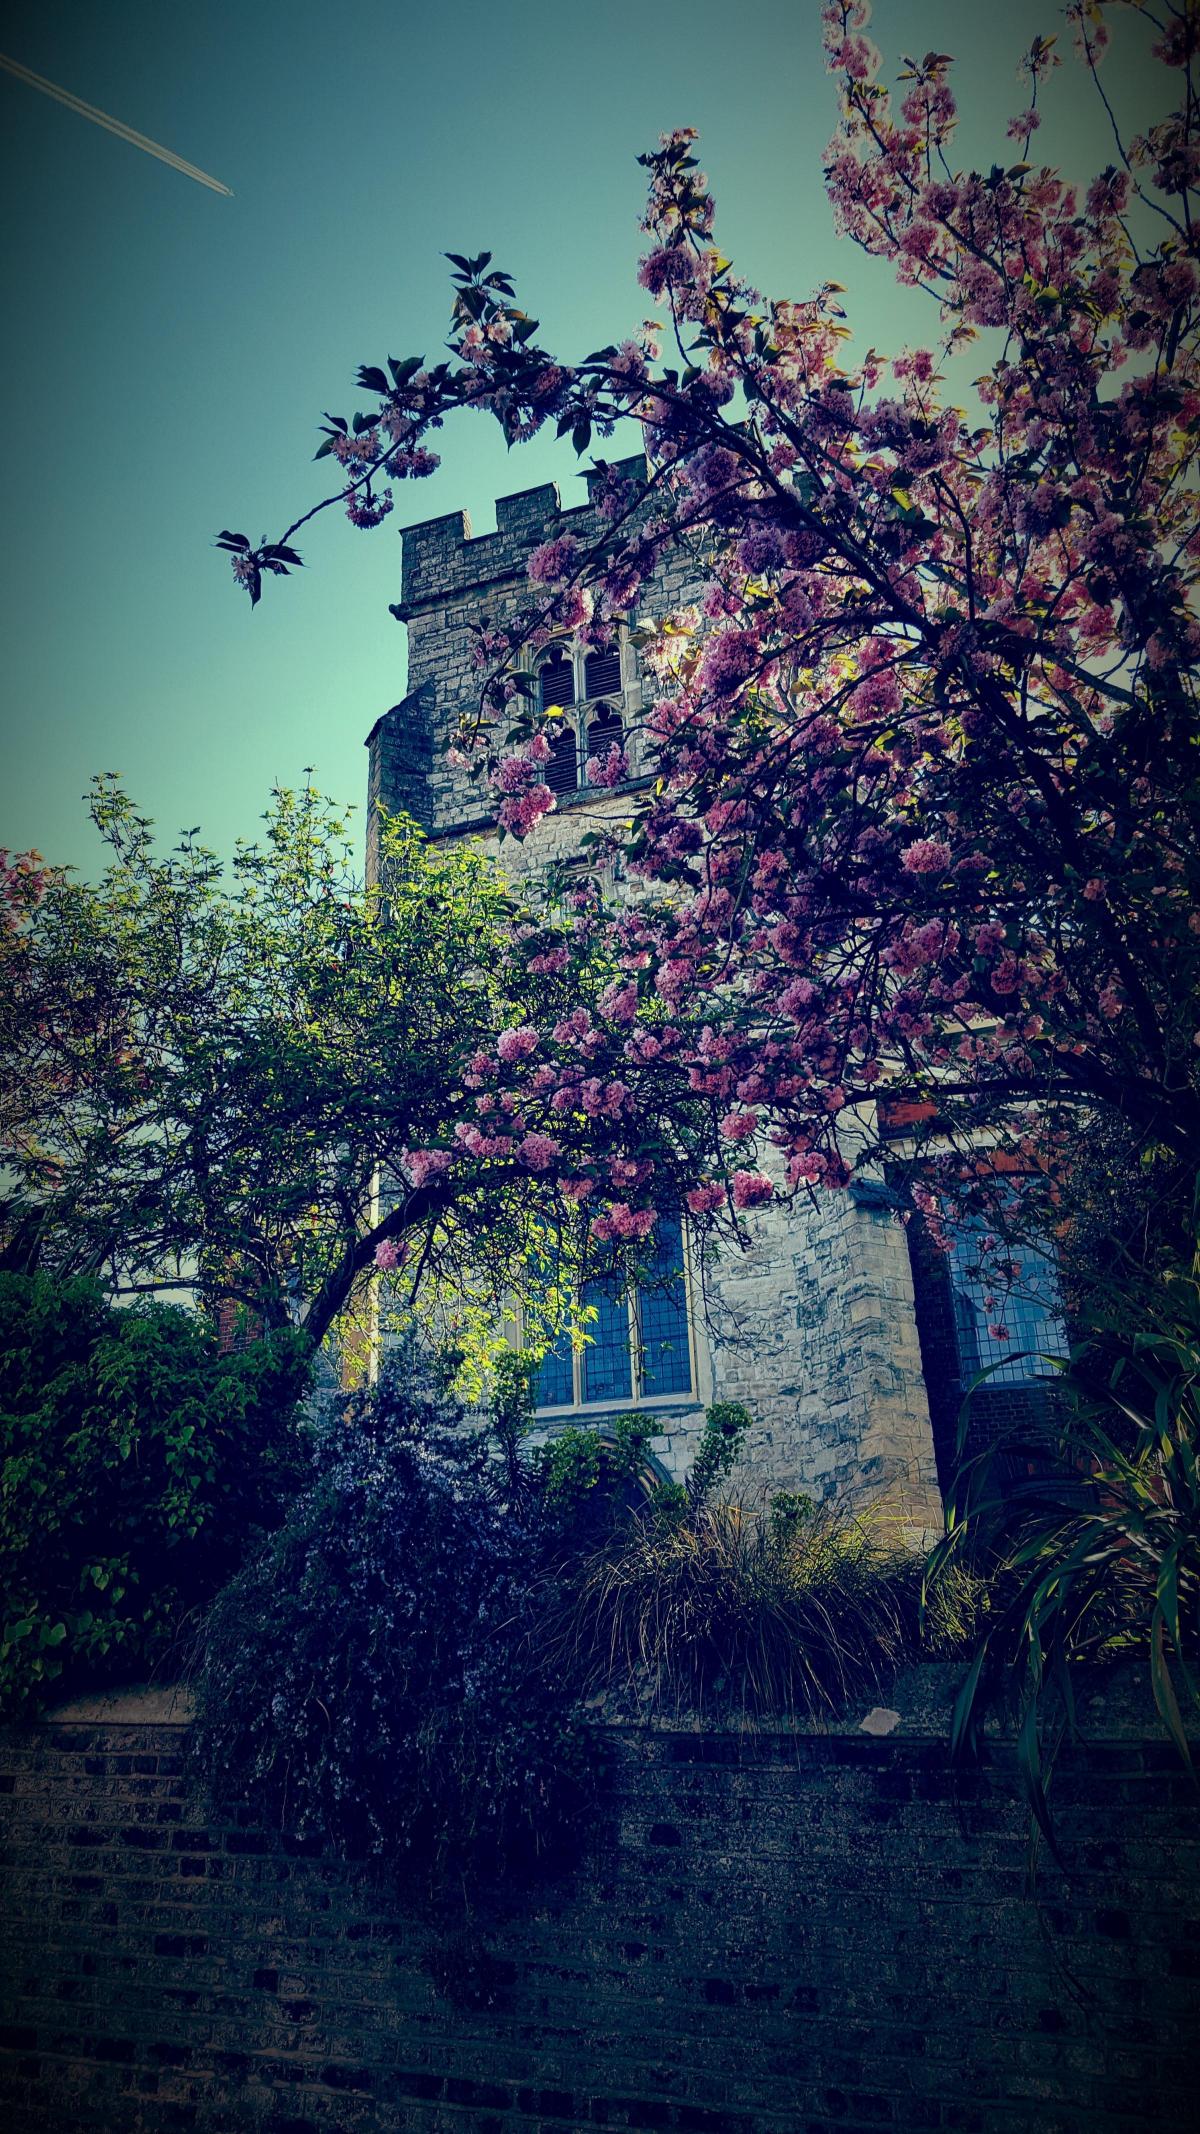 Bryan Staff sent in this photo of the spring mood around St Mary's Church in Twickenham